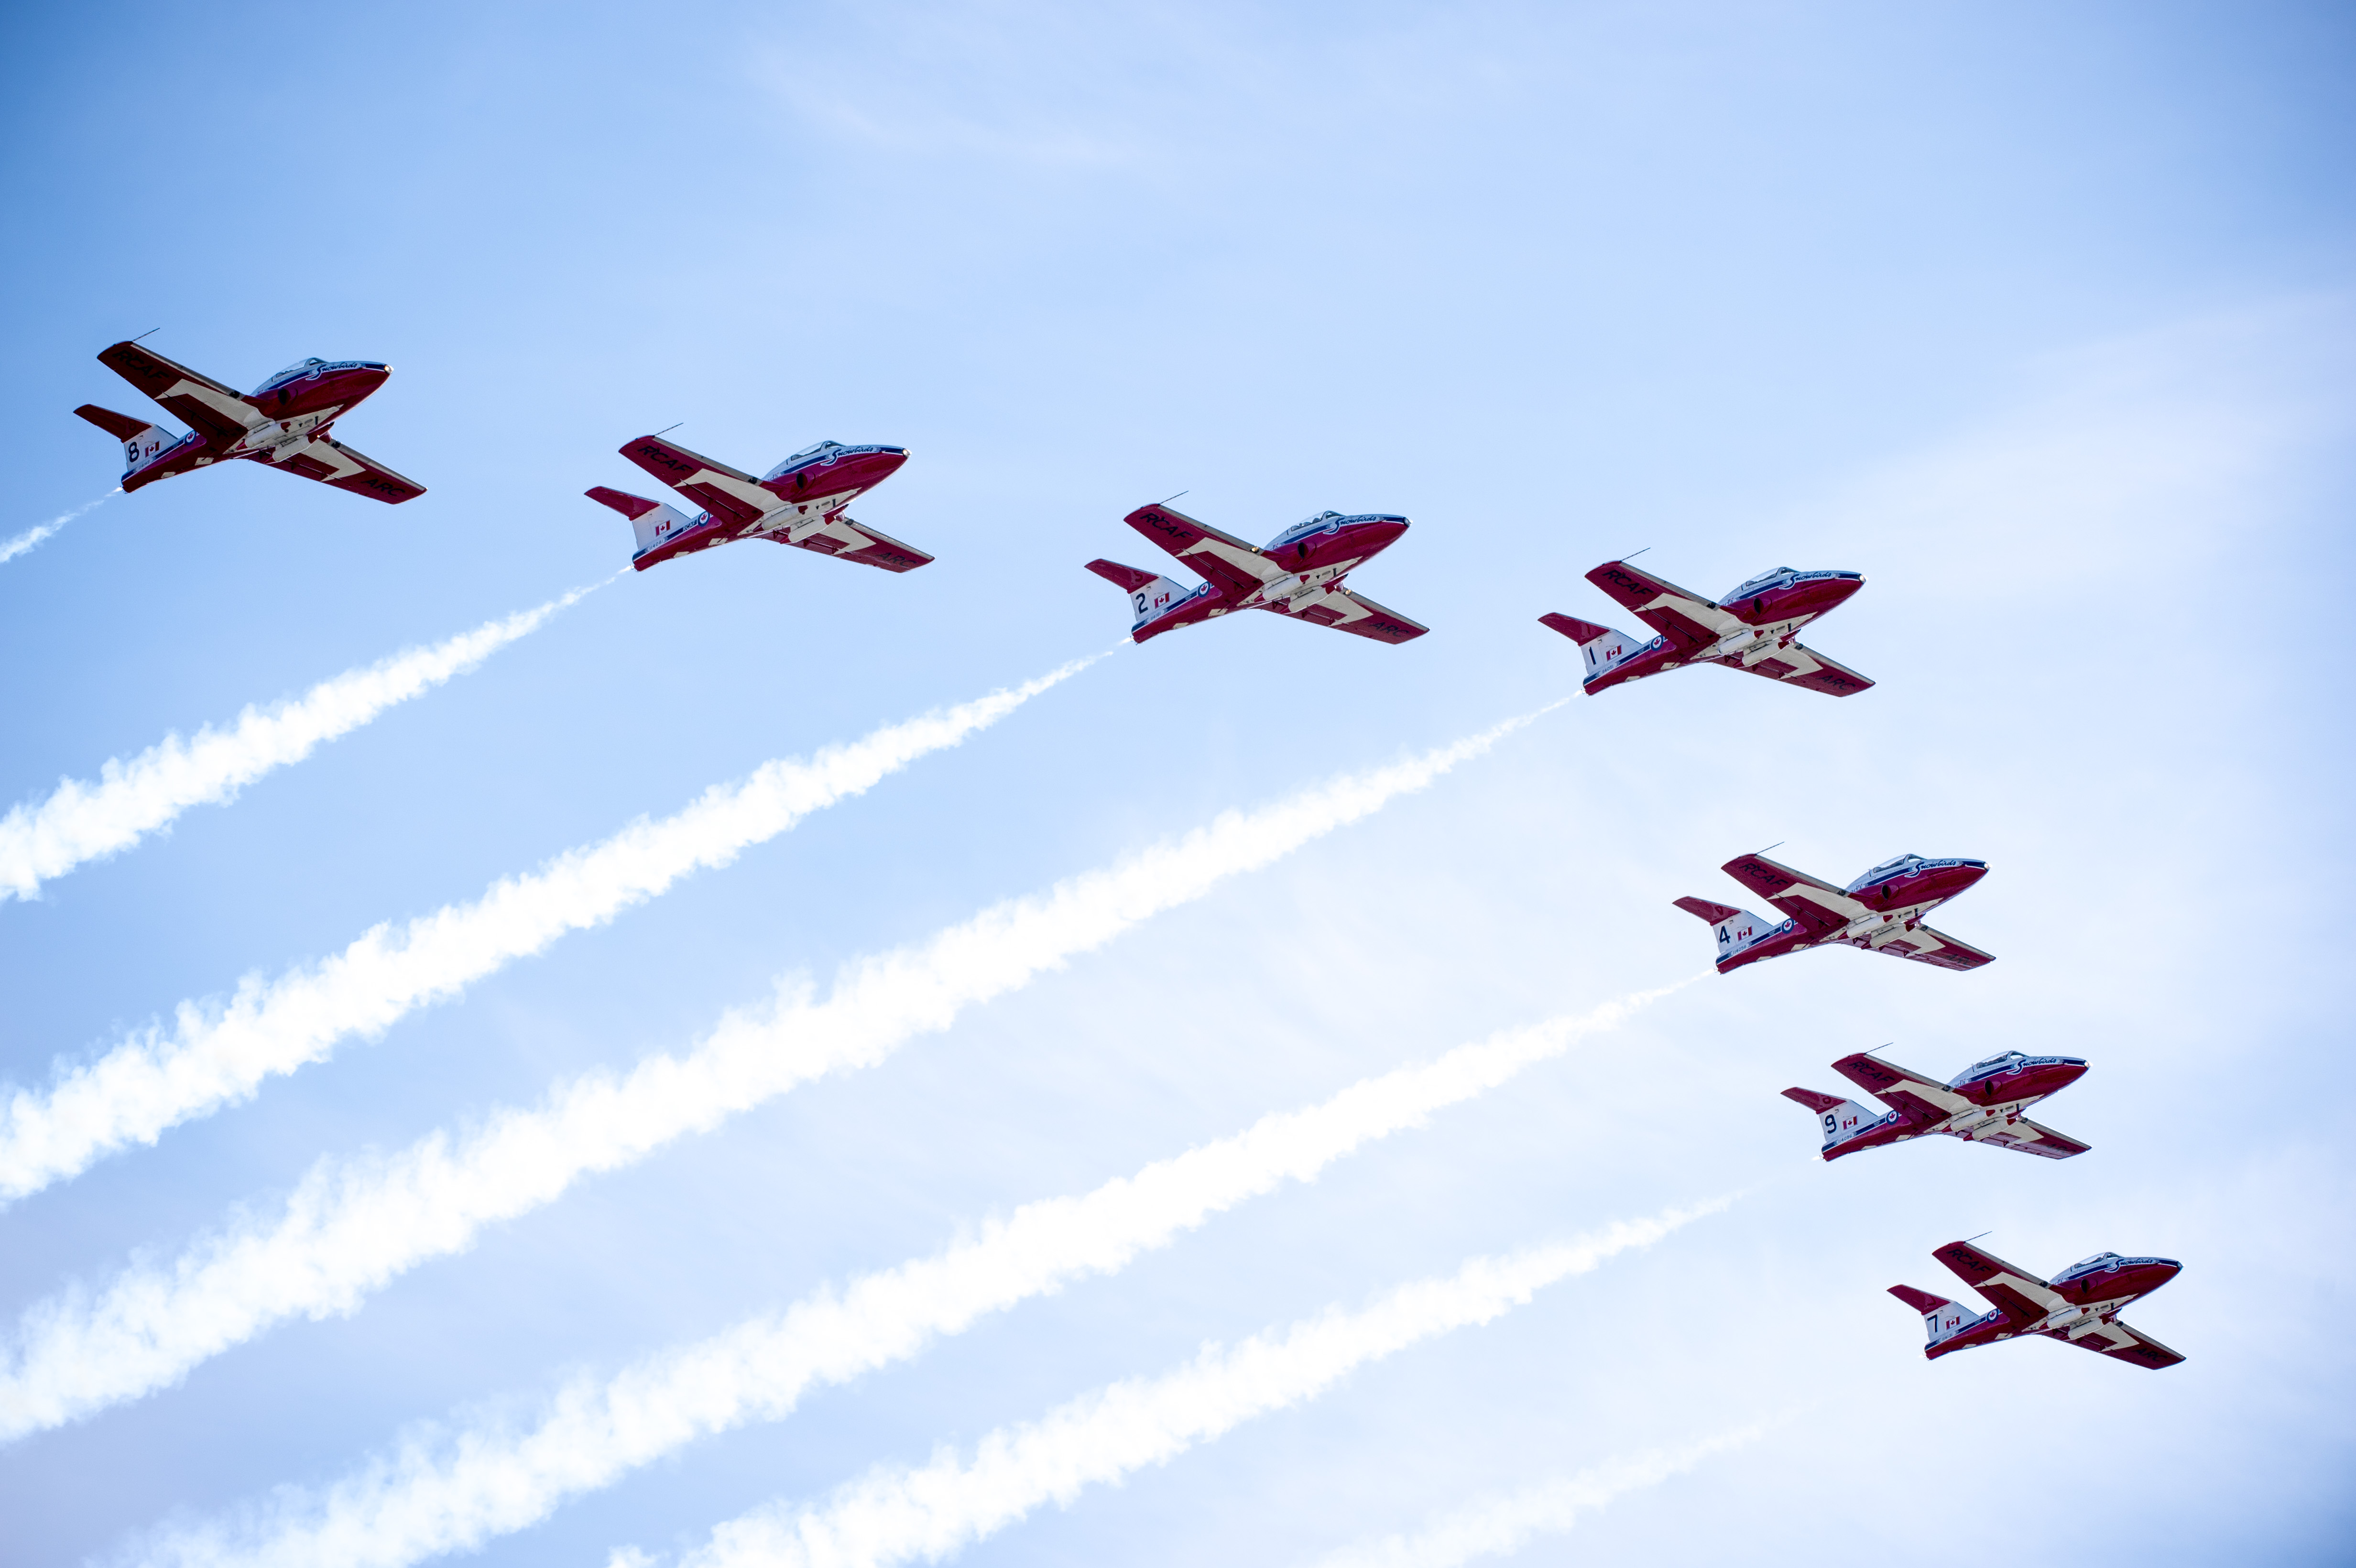 Seven red and white jet aircraft fly in formation.